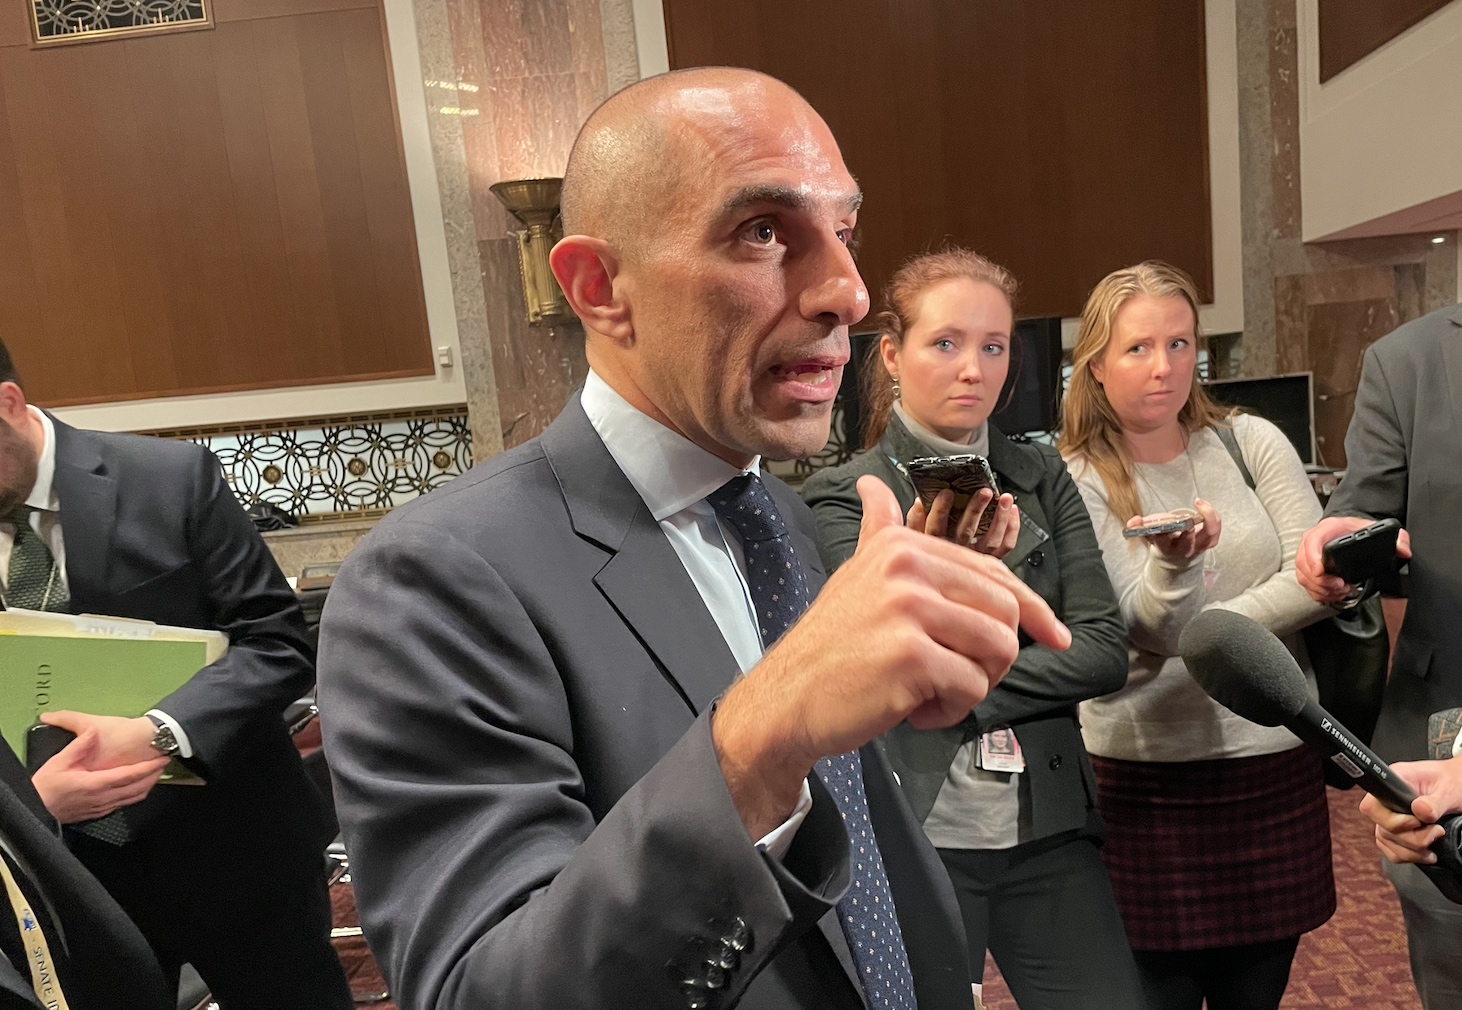 Rostin Behnam, chairman of the Commodities Futures Trading Commission, speaks to reporters Thursday afternoon after a U.S. Senate committee hearing. Two reporters are standing on the right side of the photo.